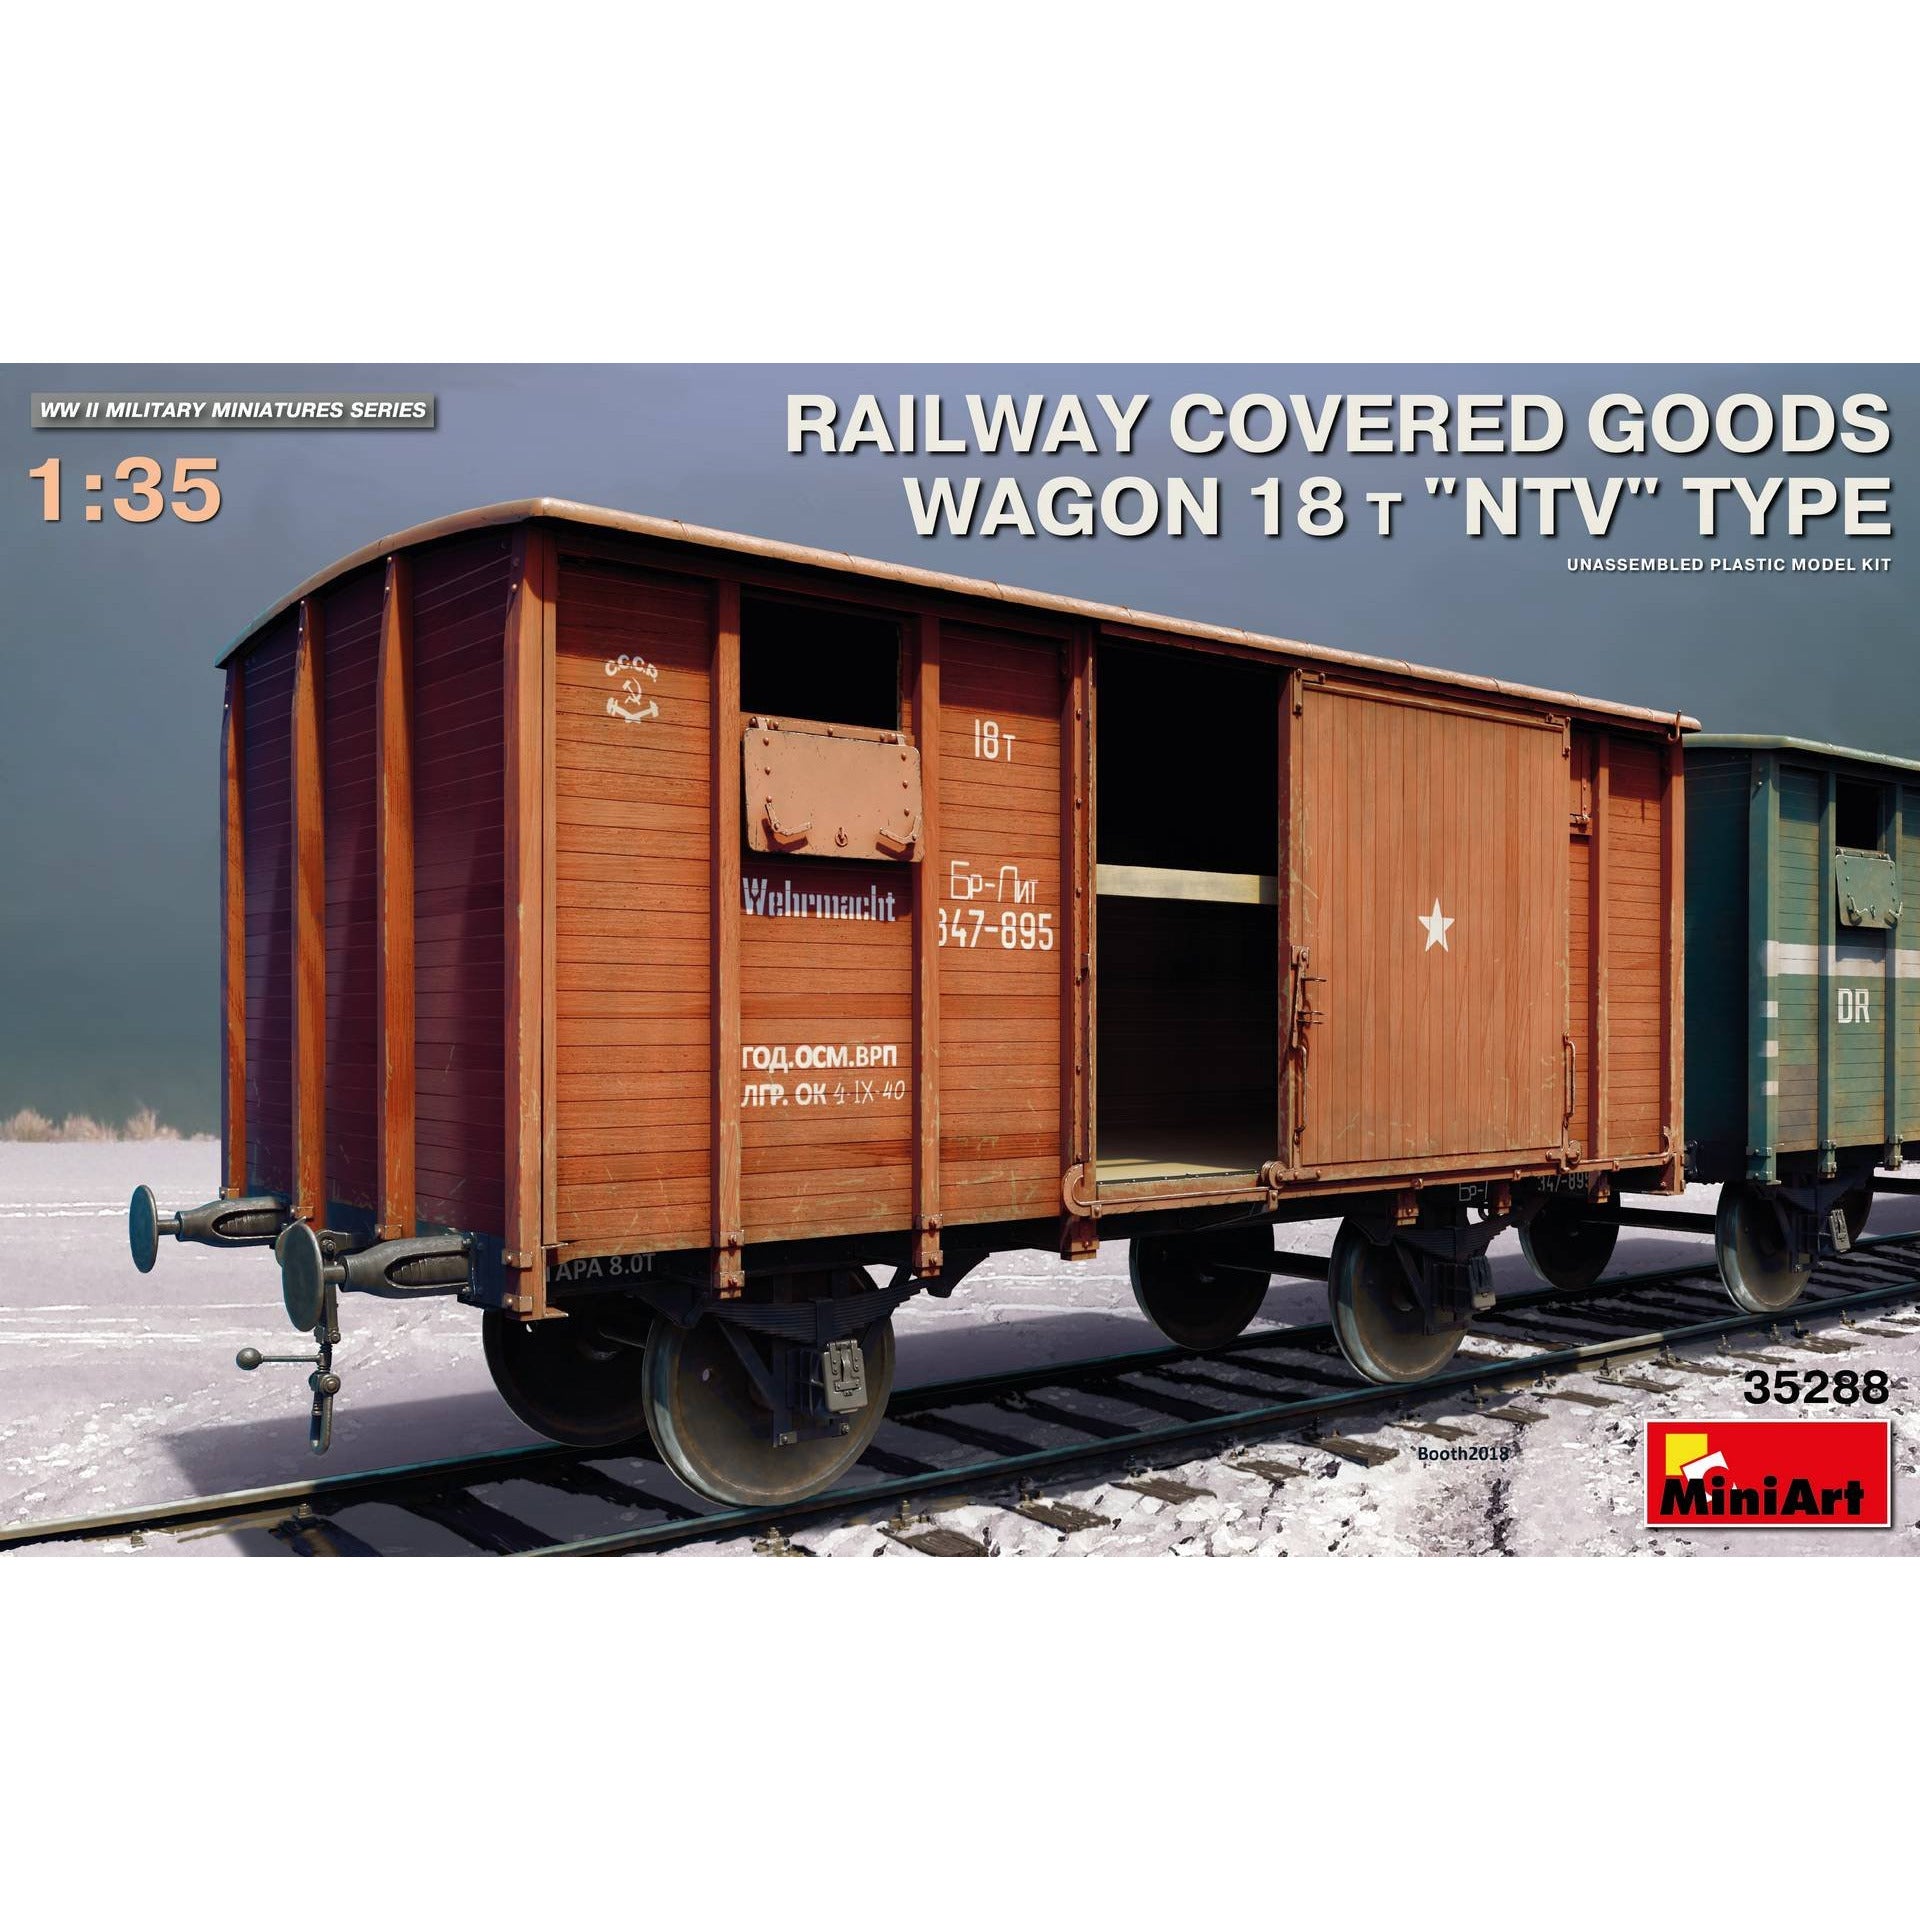 Railway Covered Goods Wagon 18t "NTV" Type 1/35 by Miniart